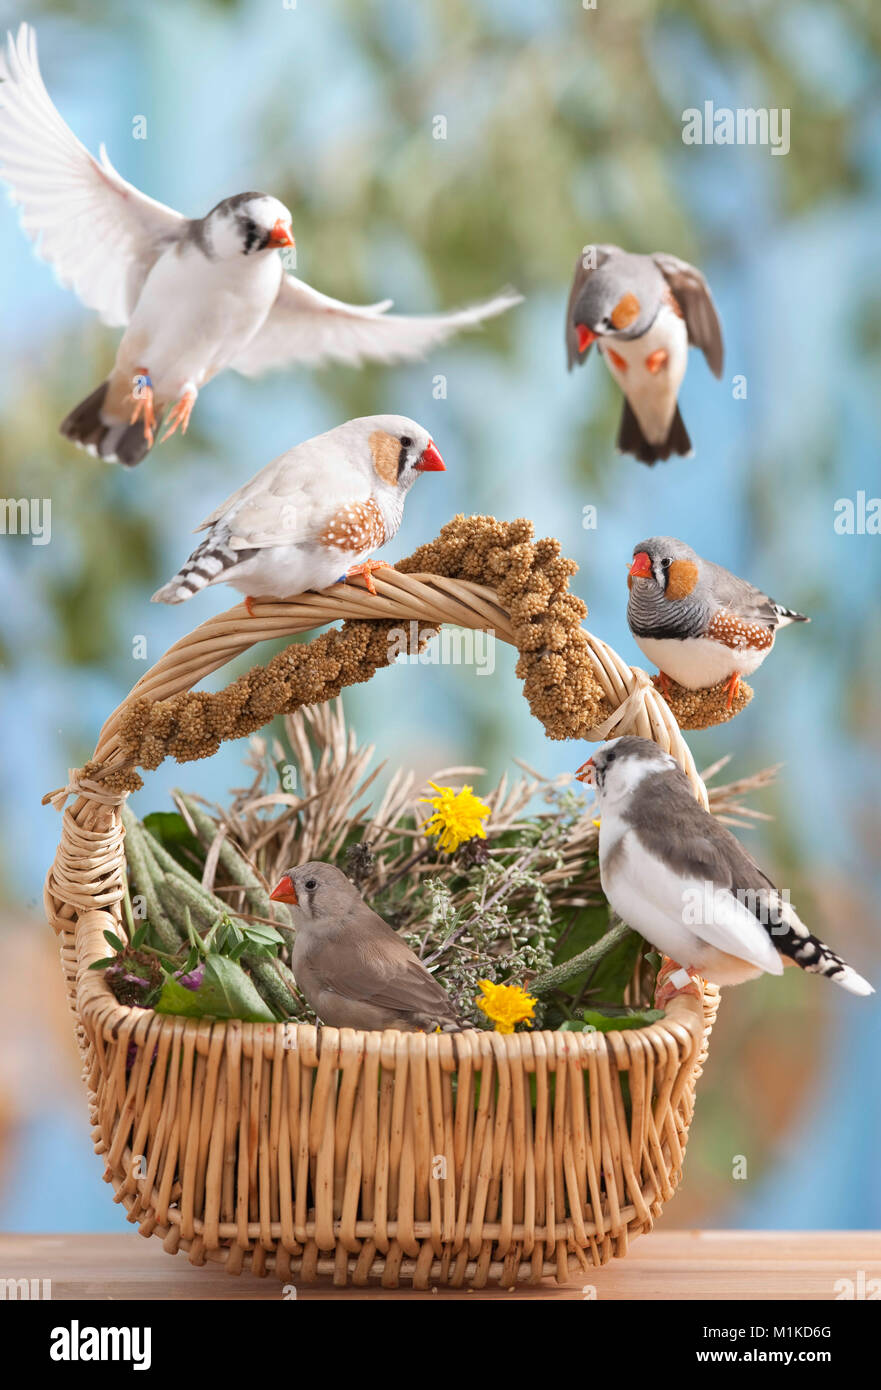 Zebra Finch (Taeniopygia guttata). Six adult birds at a basket filled with herbs. Germany Stock Photo